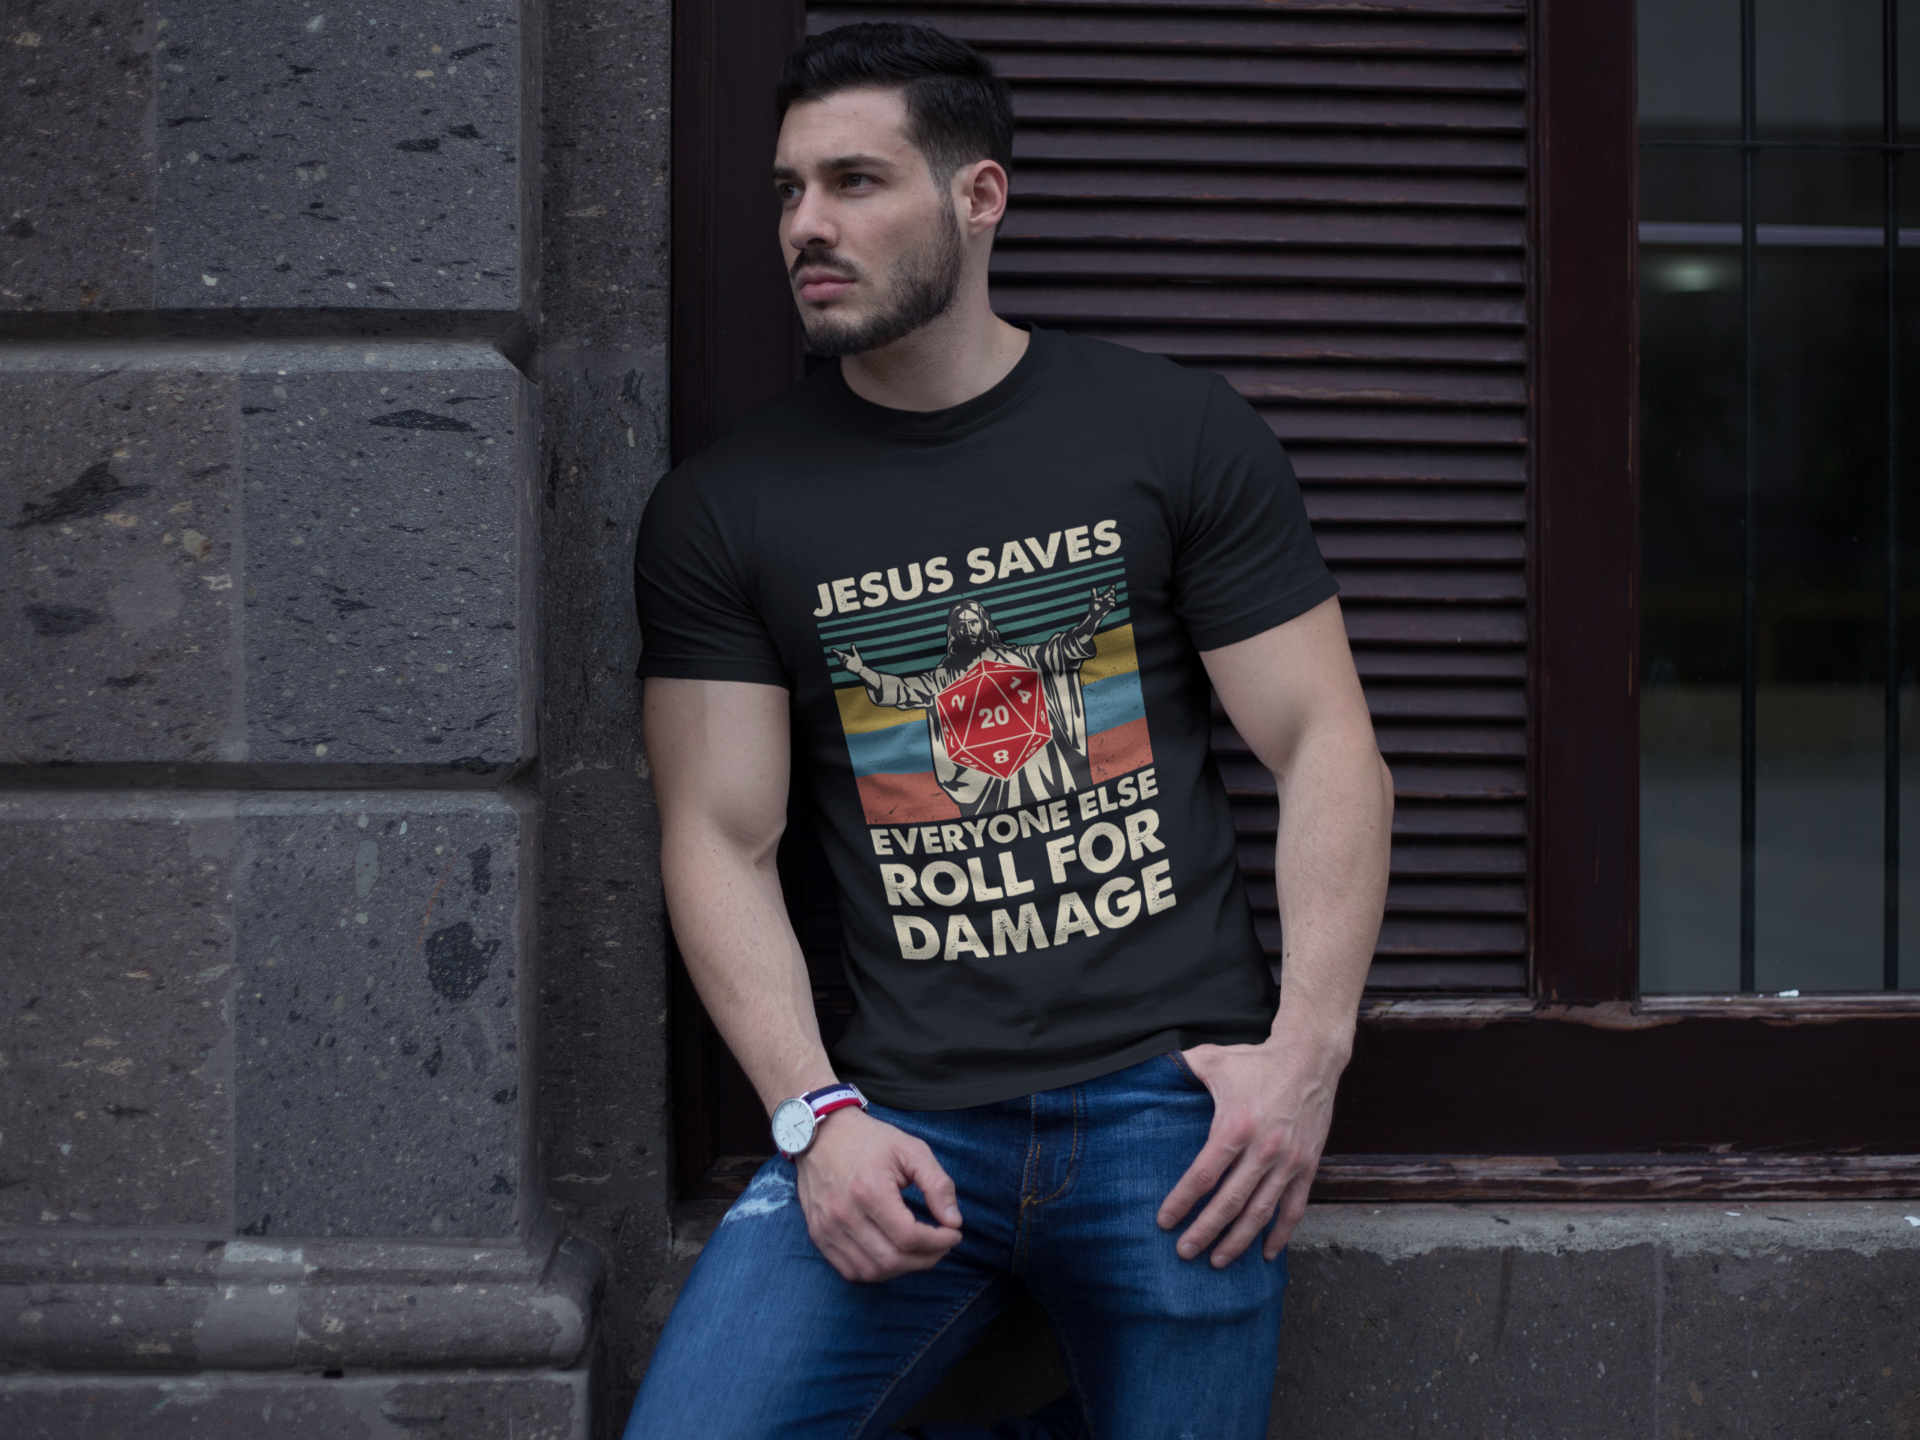 Dungeon And Dragon T Shirt, Jesus Saves Everyone Else Roll For Damage DND T Shirt, RPG Dice Games Tshirt